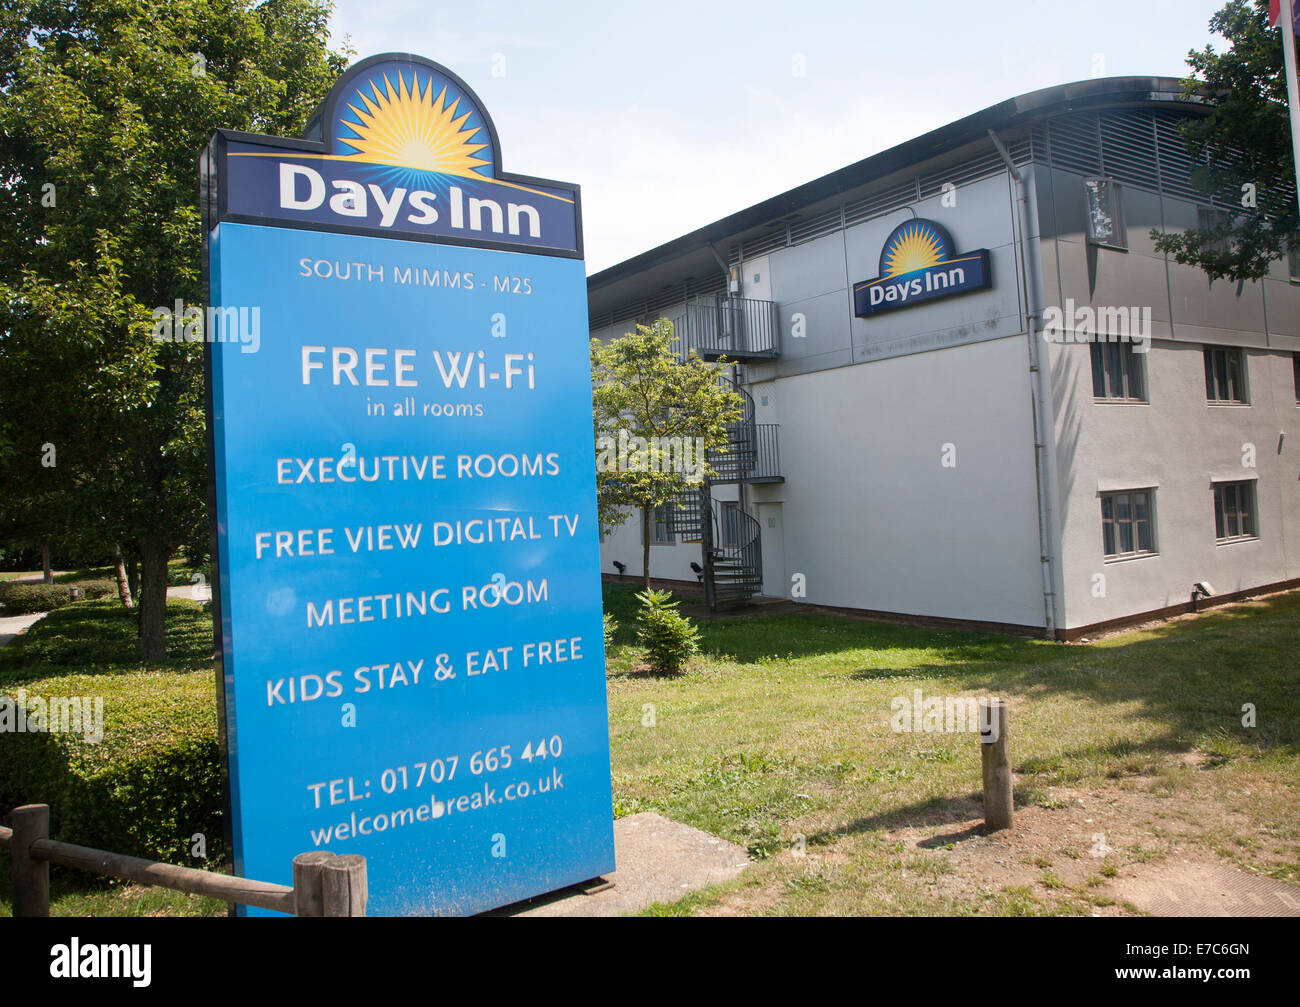 Days Inn budget hotel at South Mimms, Potters Bar, Hertfordshire, England Stock Photo